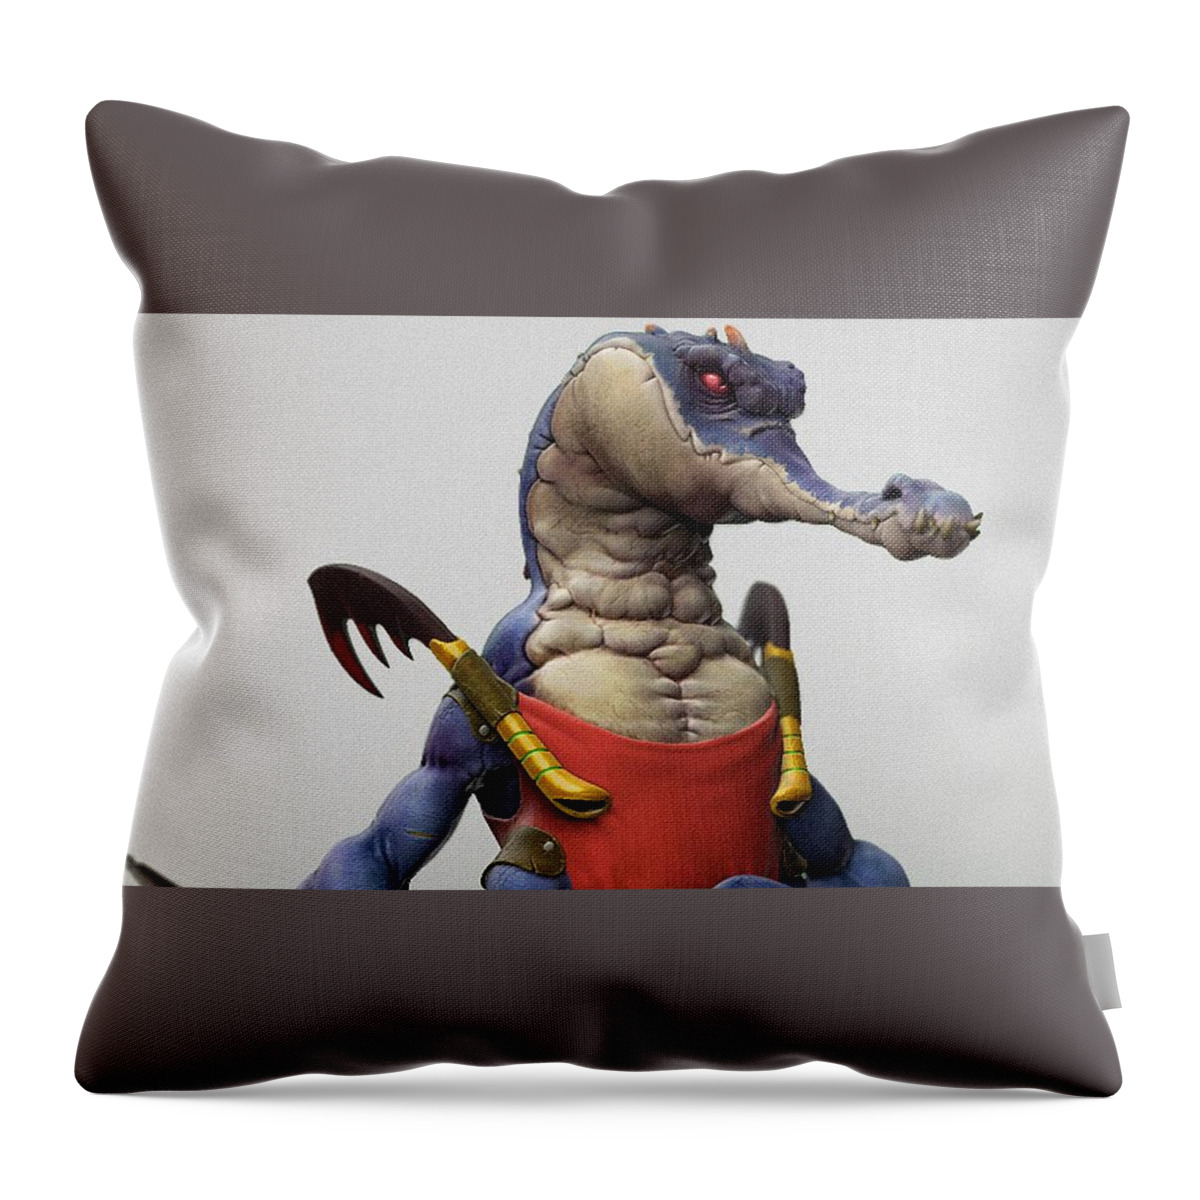 Creature Throw Pillow featuring the digital art Creature #35 by Super Lovely